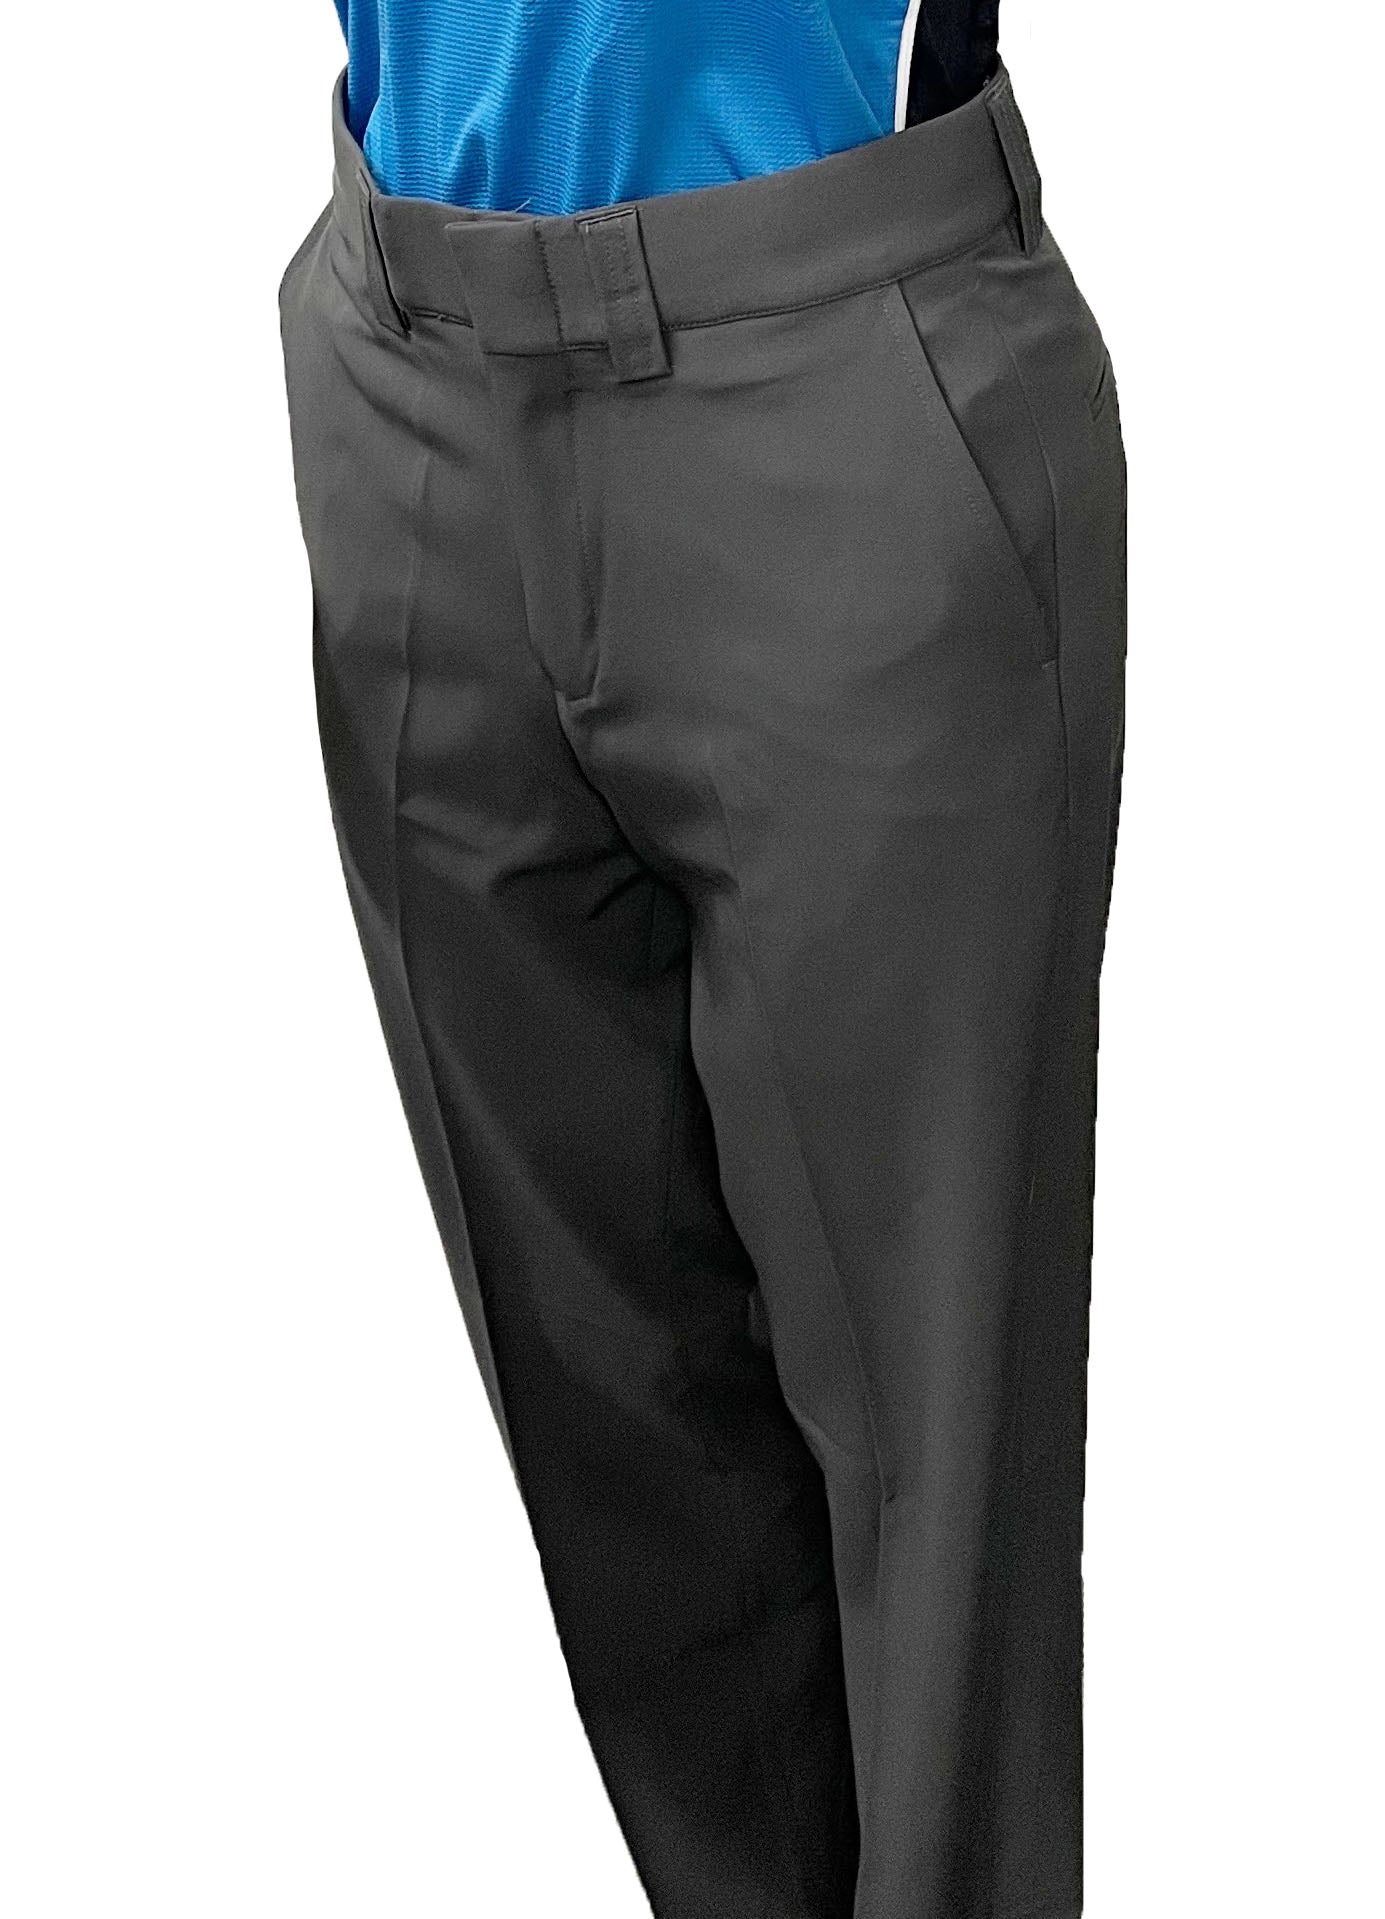 New** Women's 4-Way Stretch Flat Front Pants by Smitty (No Expander) | All  Sports Officials